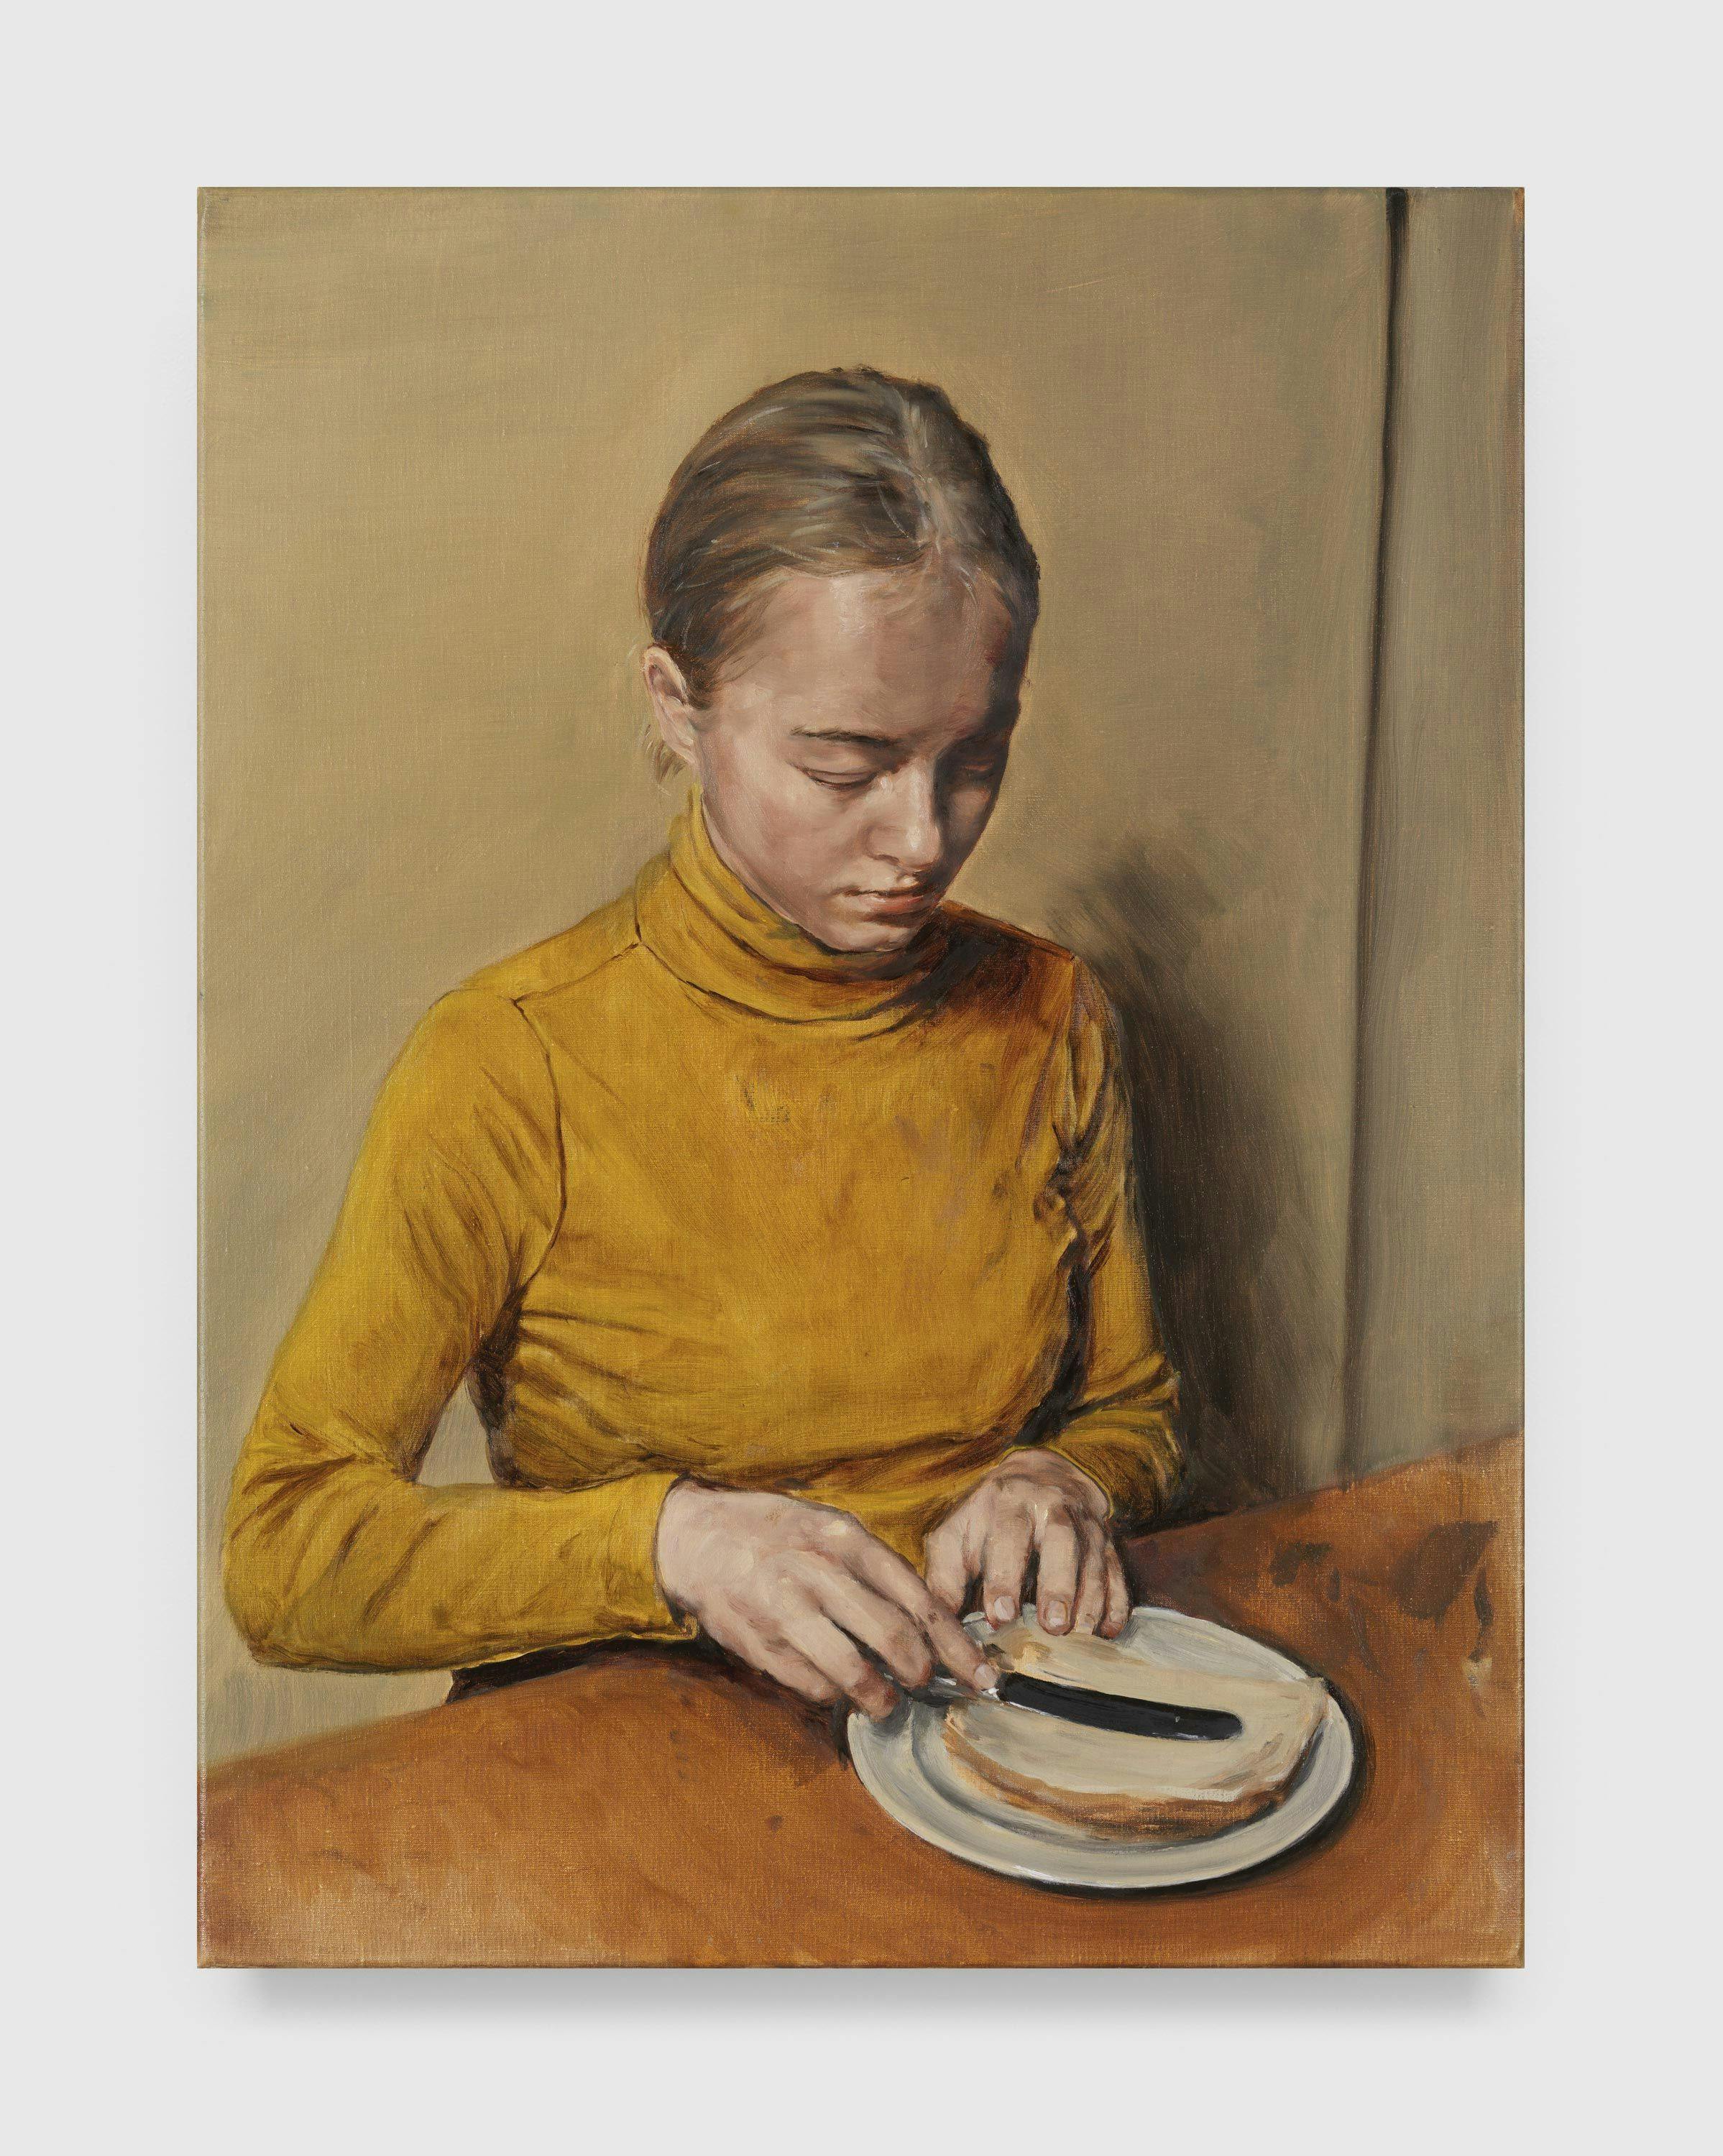 A painting by Michaël Borremans, titled The Cheese Sandwich, dated 2019.